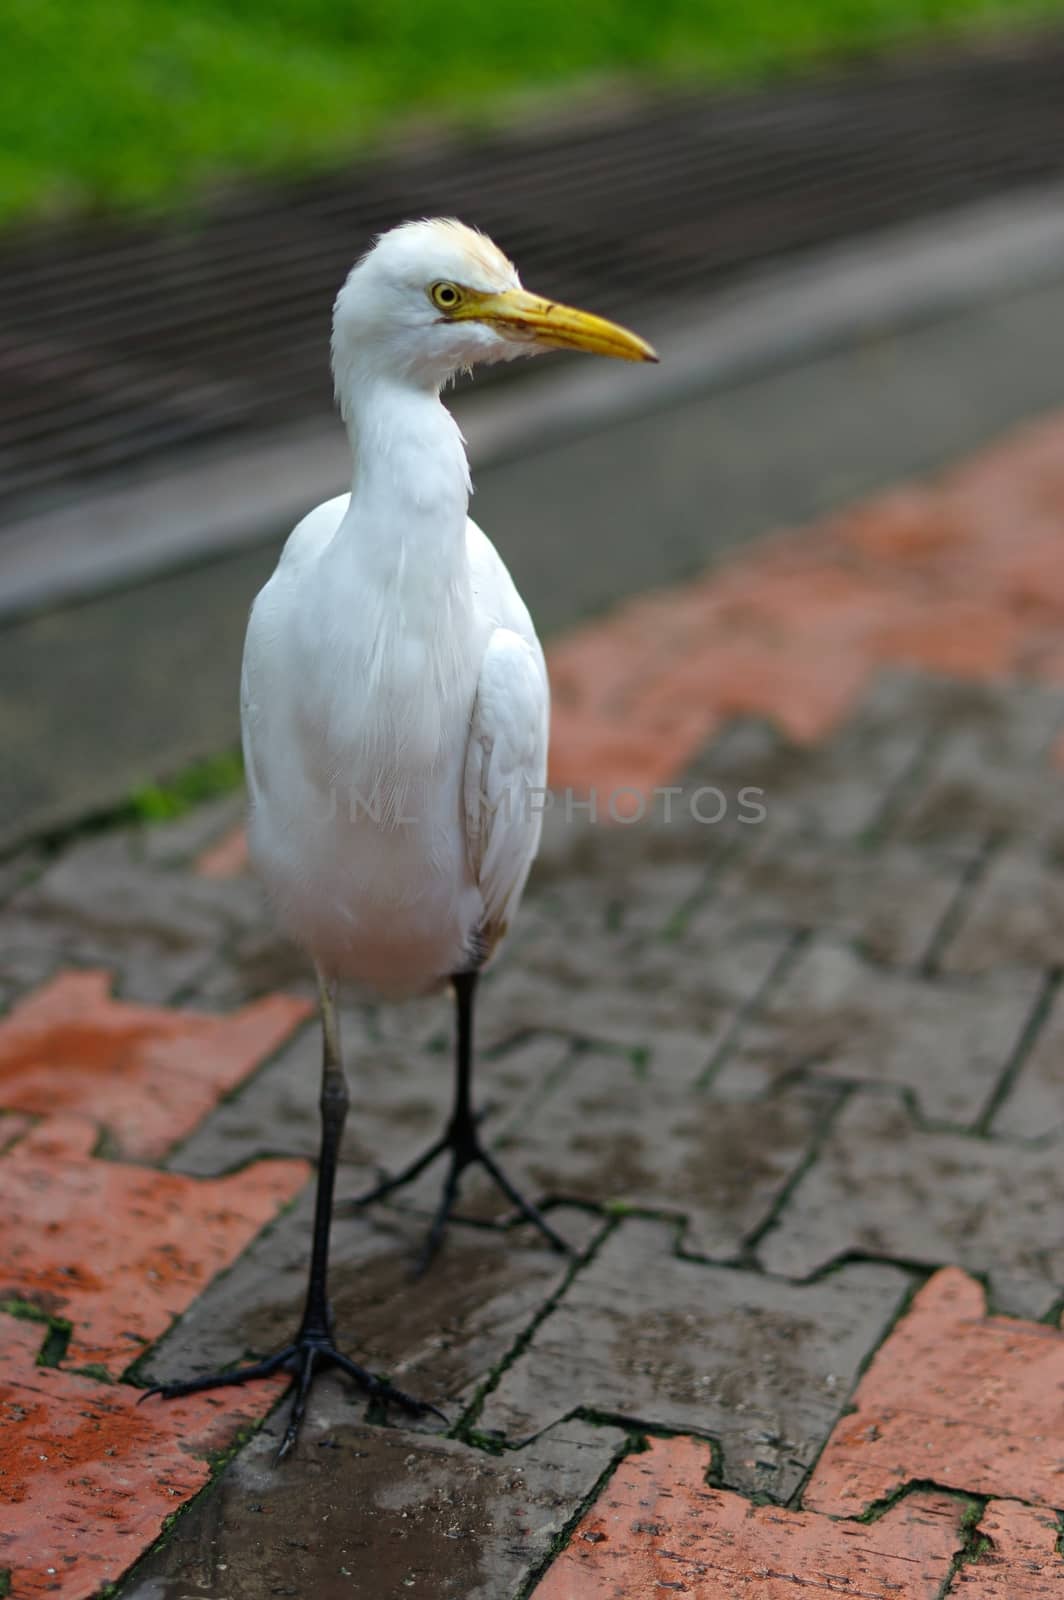 Cattle egret, ibis bubulcus wandering around at a park in Kuala Lumpur Birdpark, Malaysia by evolutionnow